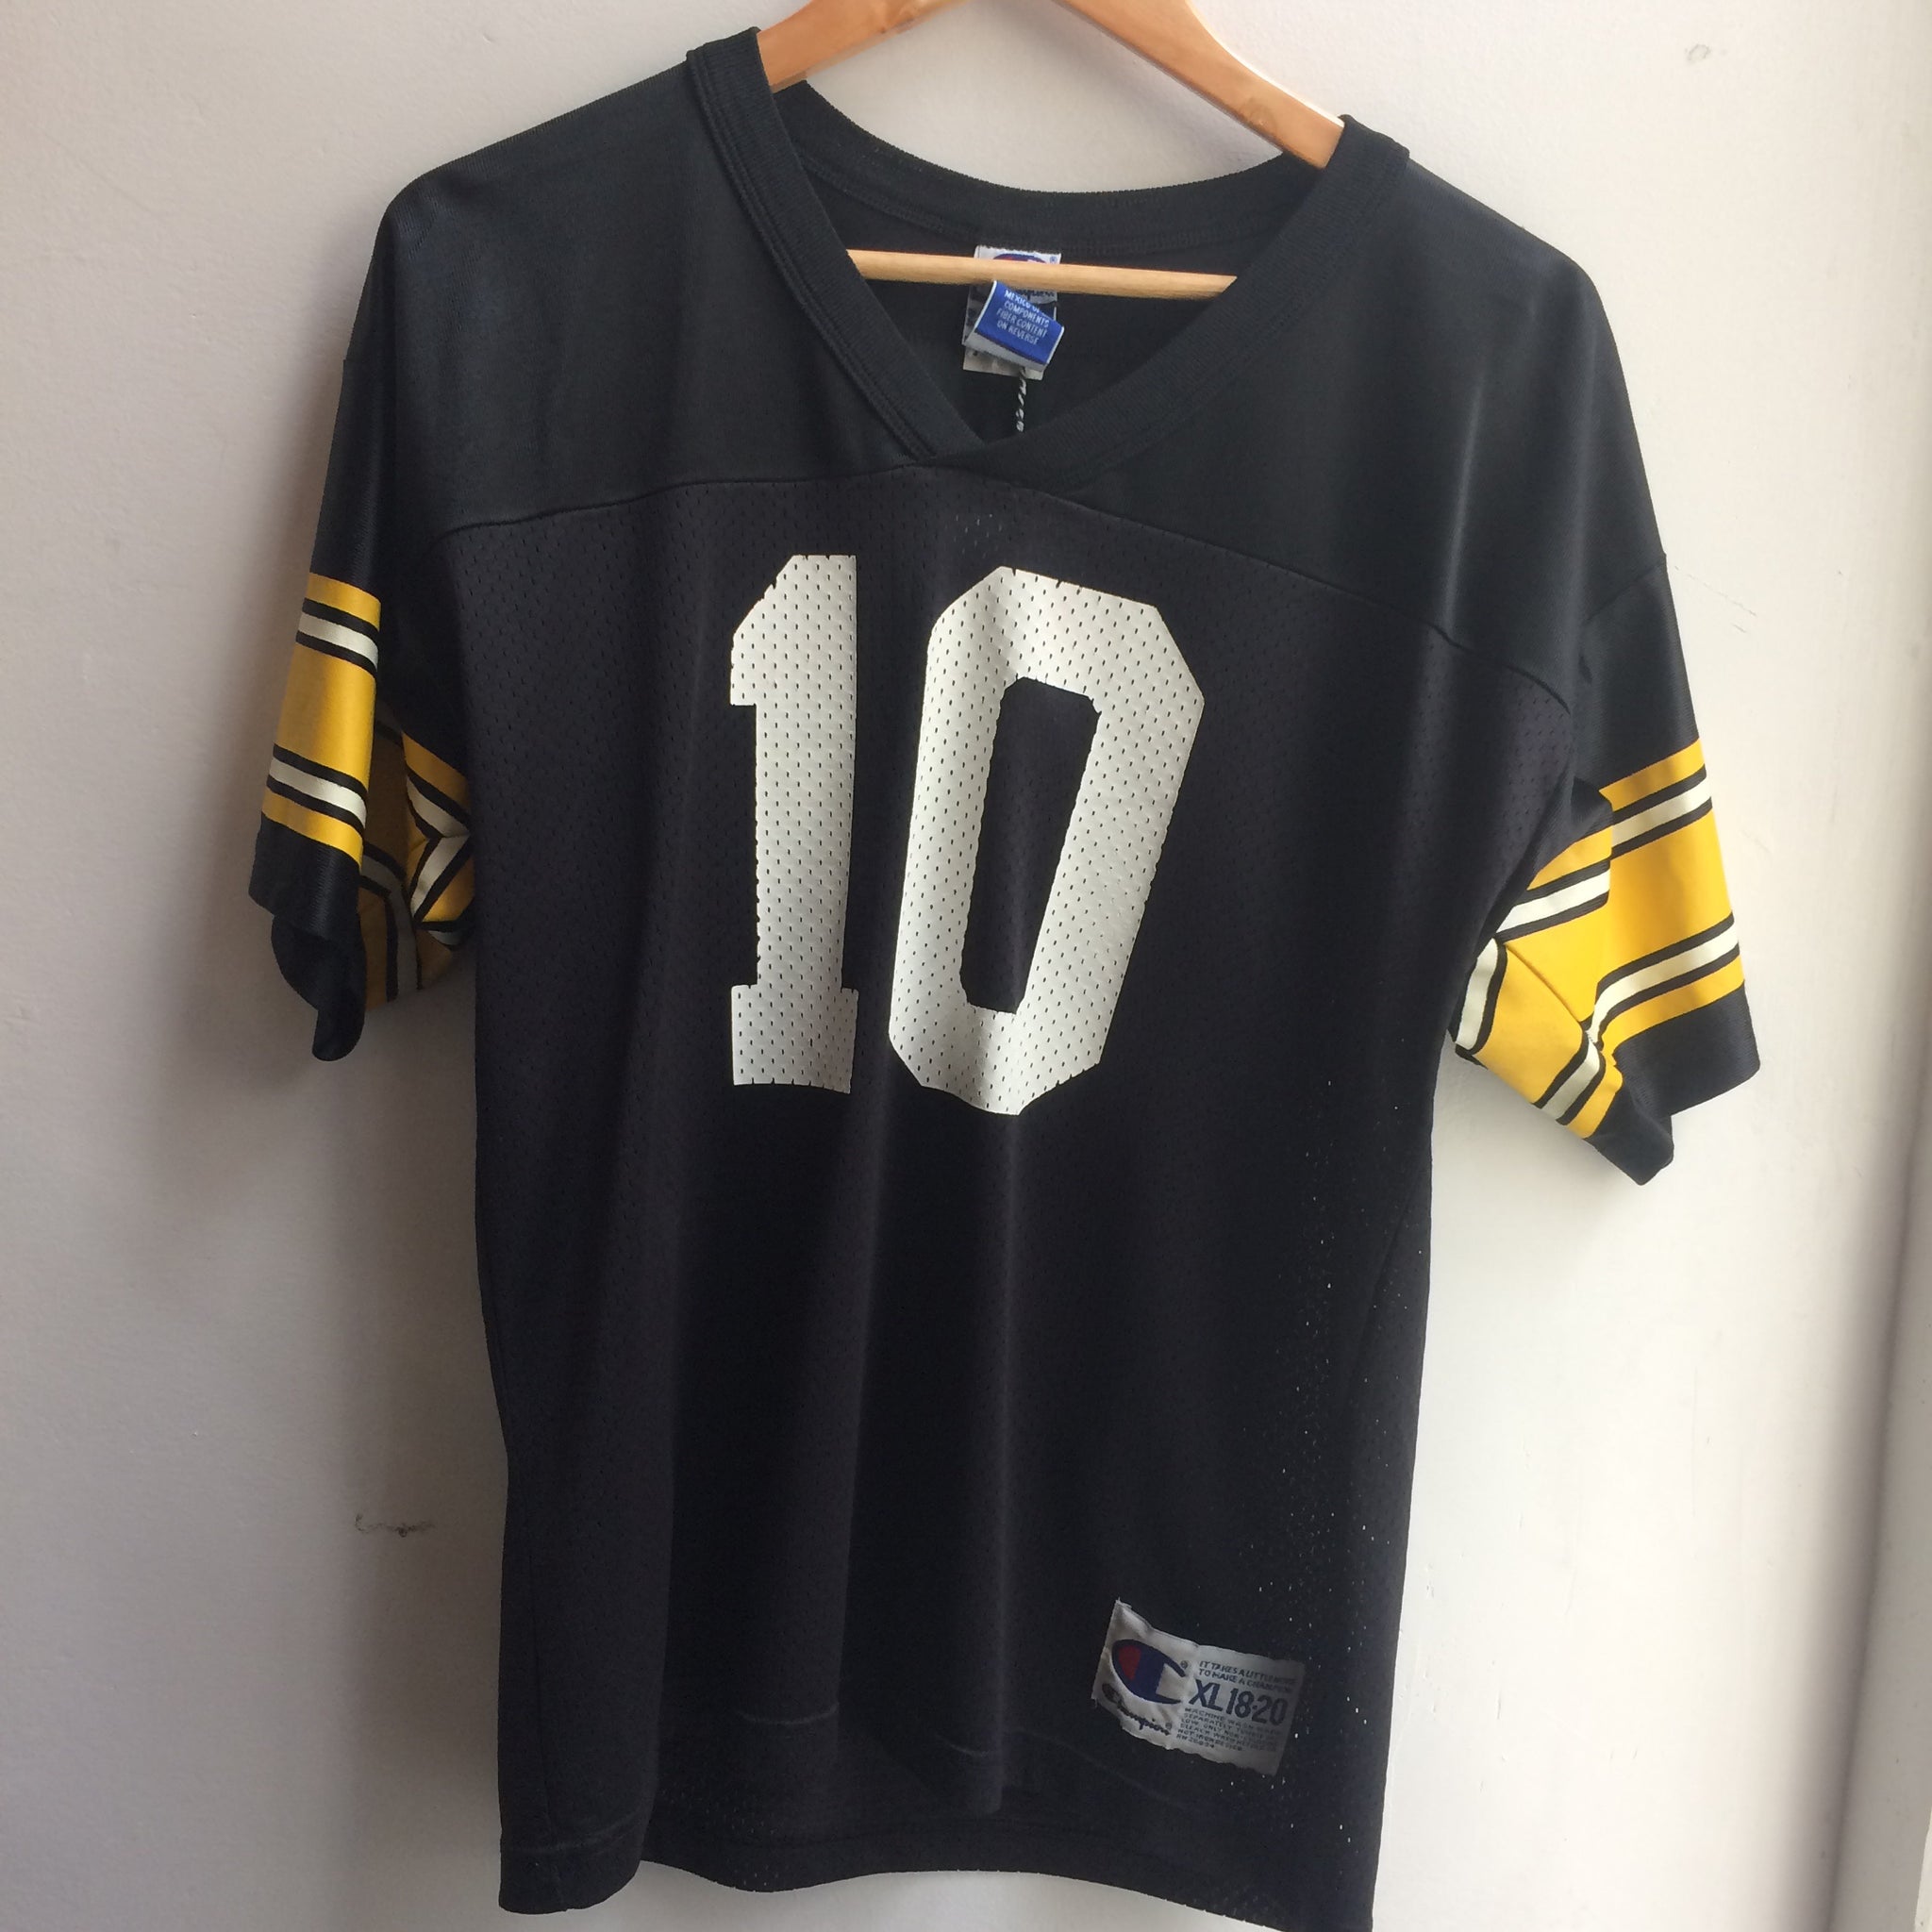 where can i get a steelers jersey